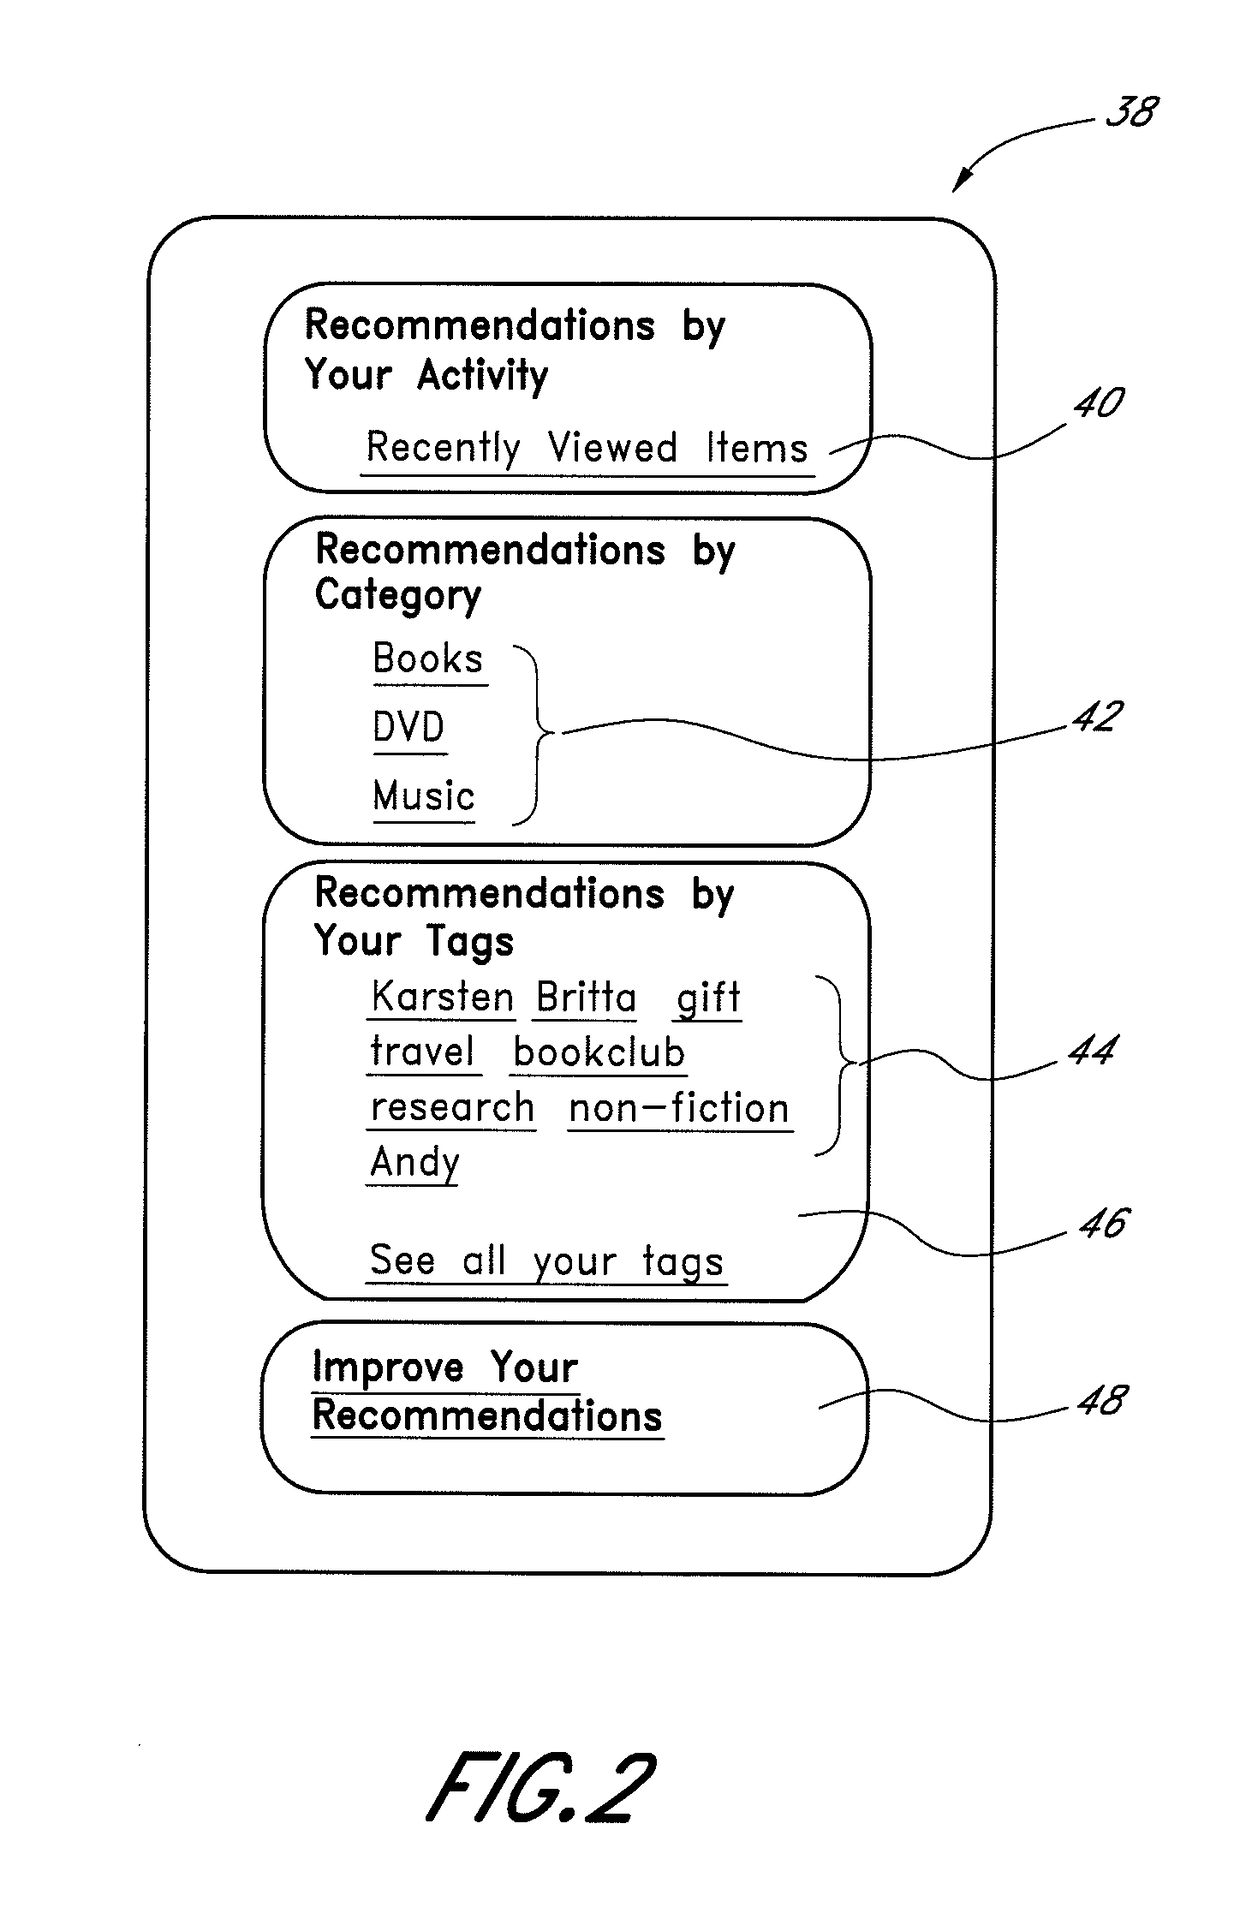 Recommendations based on item tagging activities of users